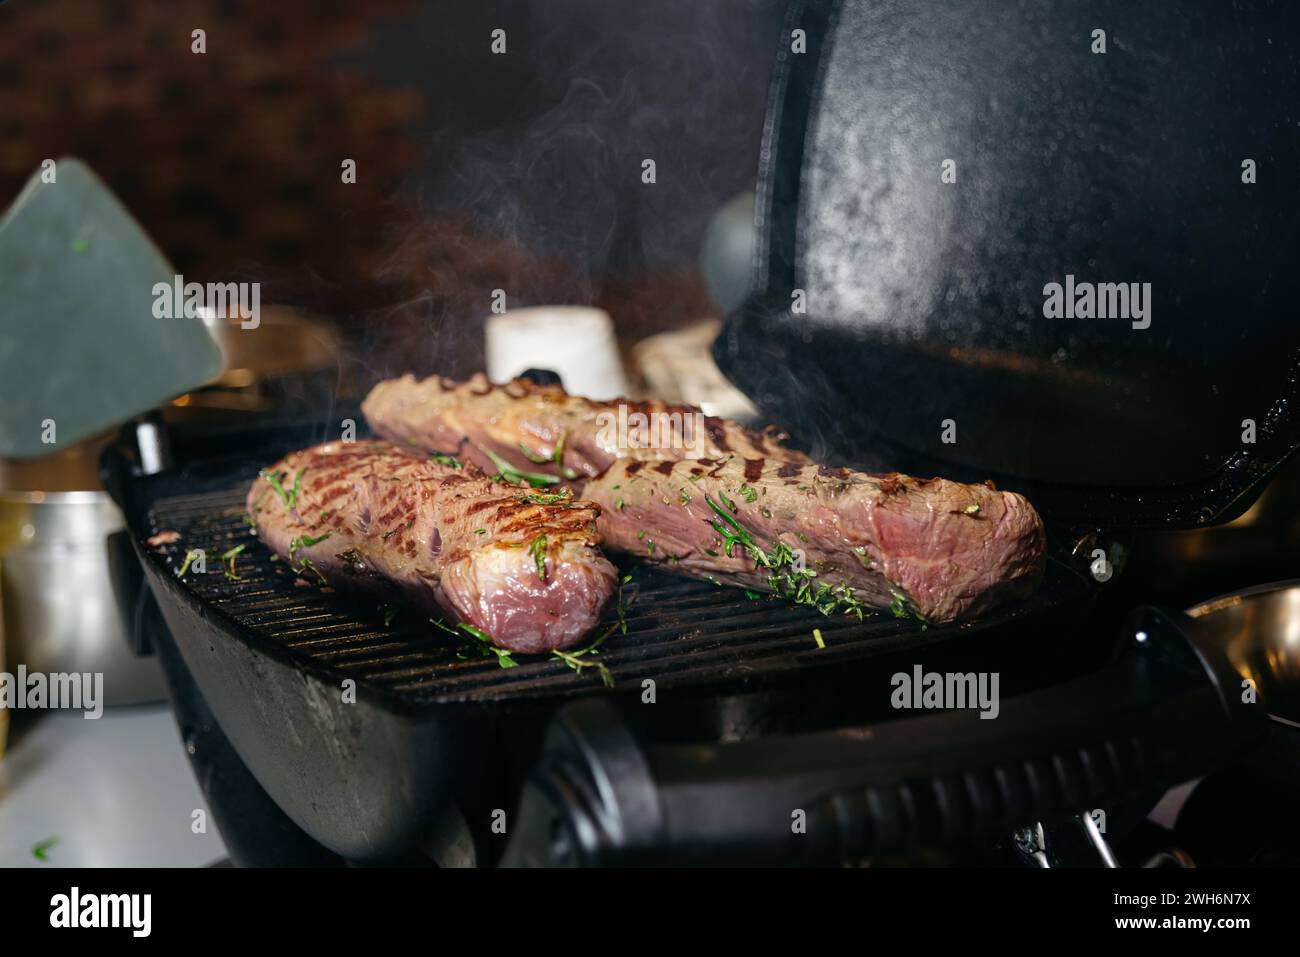 Juicy steaks seasoned with fresh herbs sizzling on a cast iron grill, steam rising in a warm, inviting kitchen setting. Stock Photo